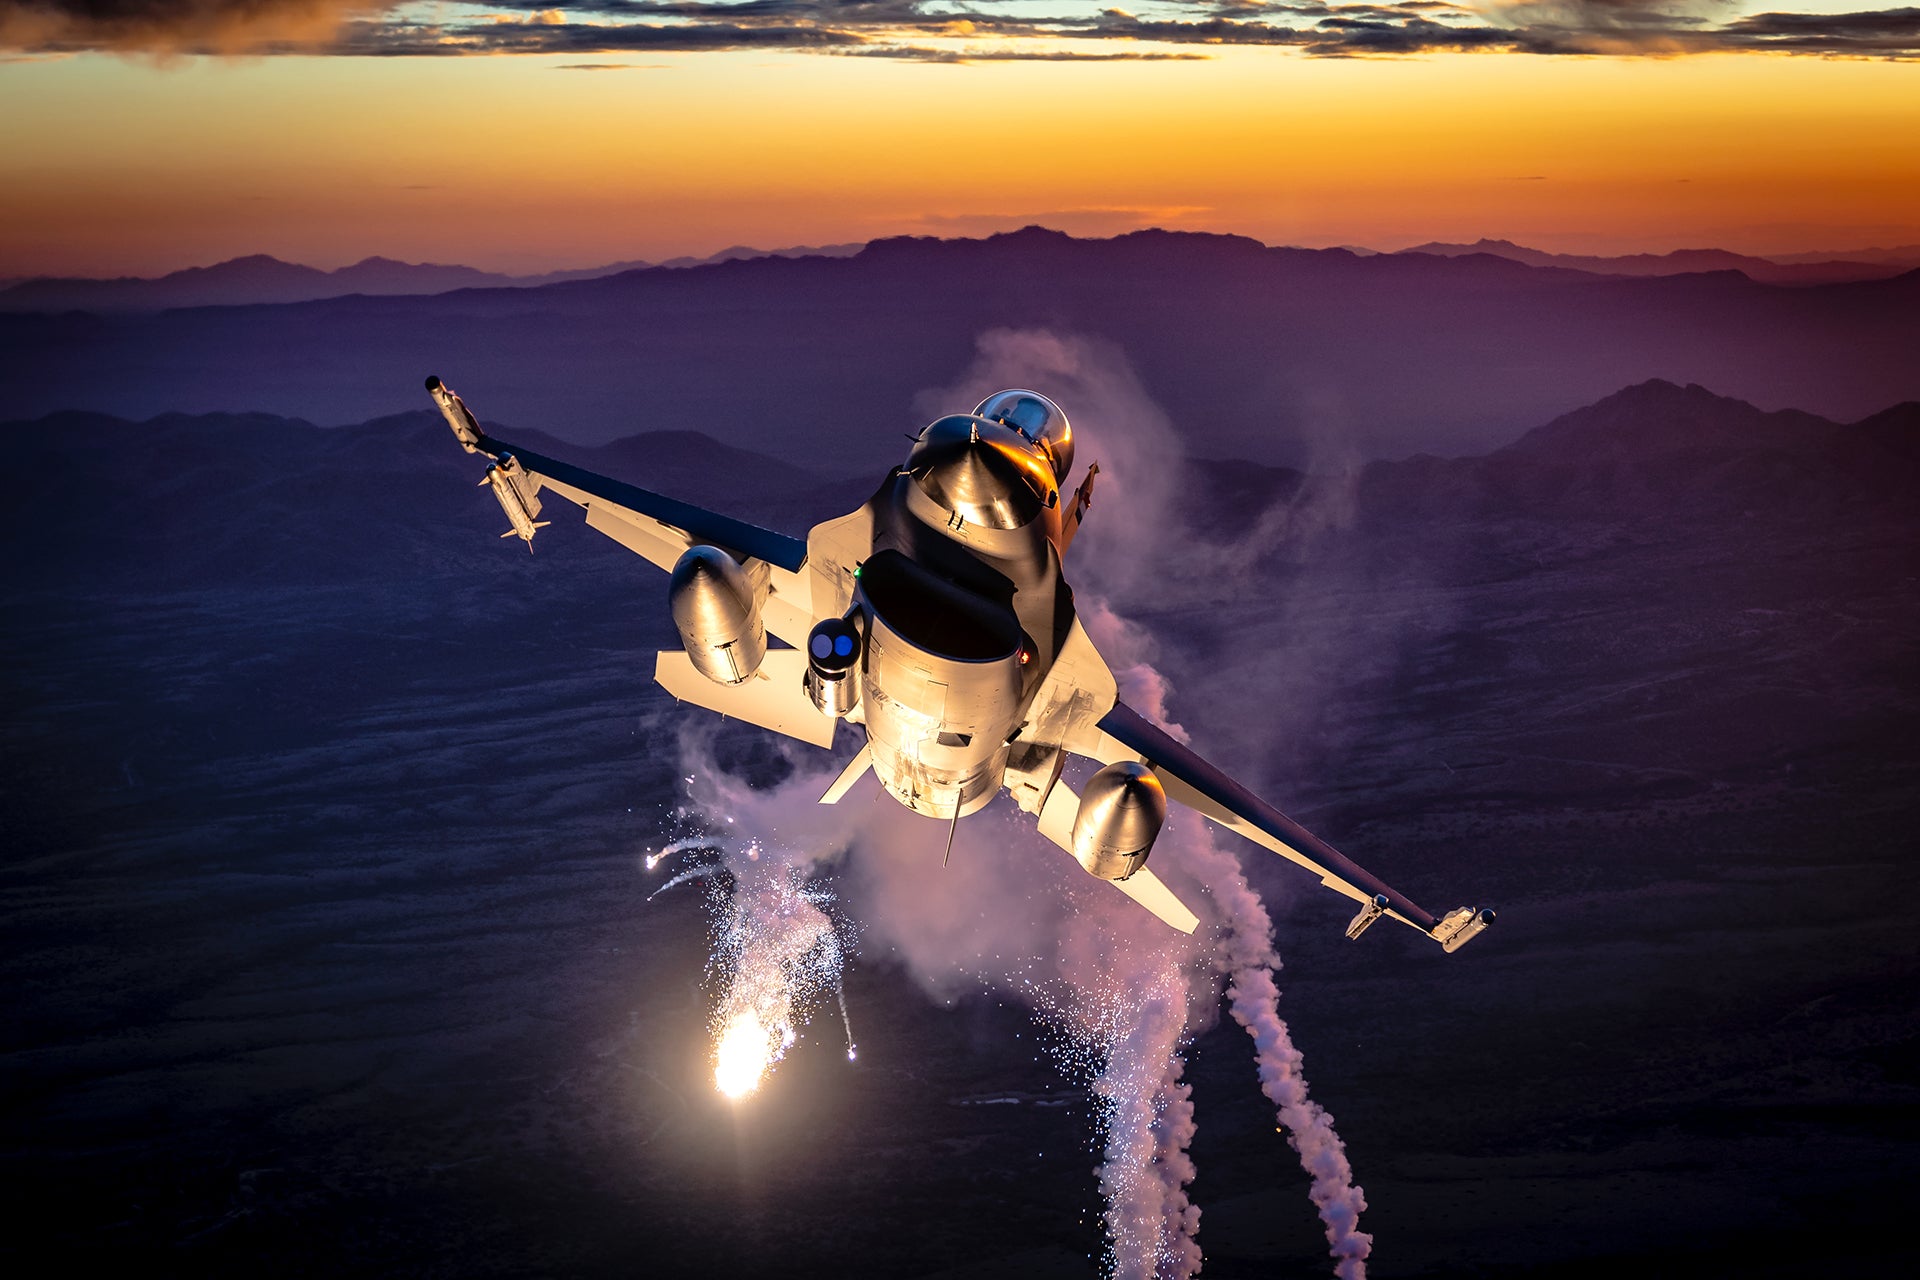 This Photo Of An F-16 High Over Arizona At Sunset Is Mind Blowingingly Stunning